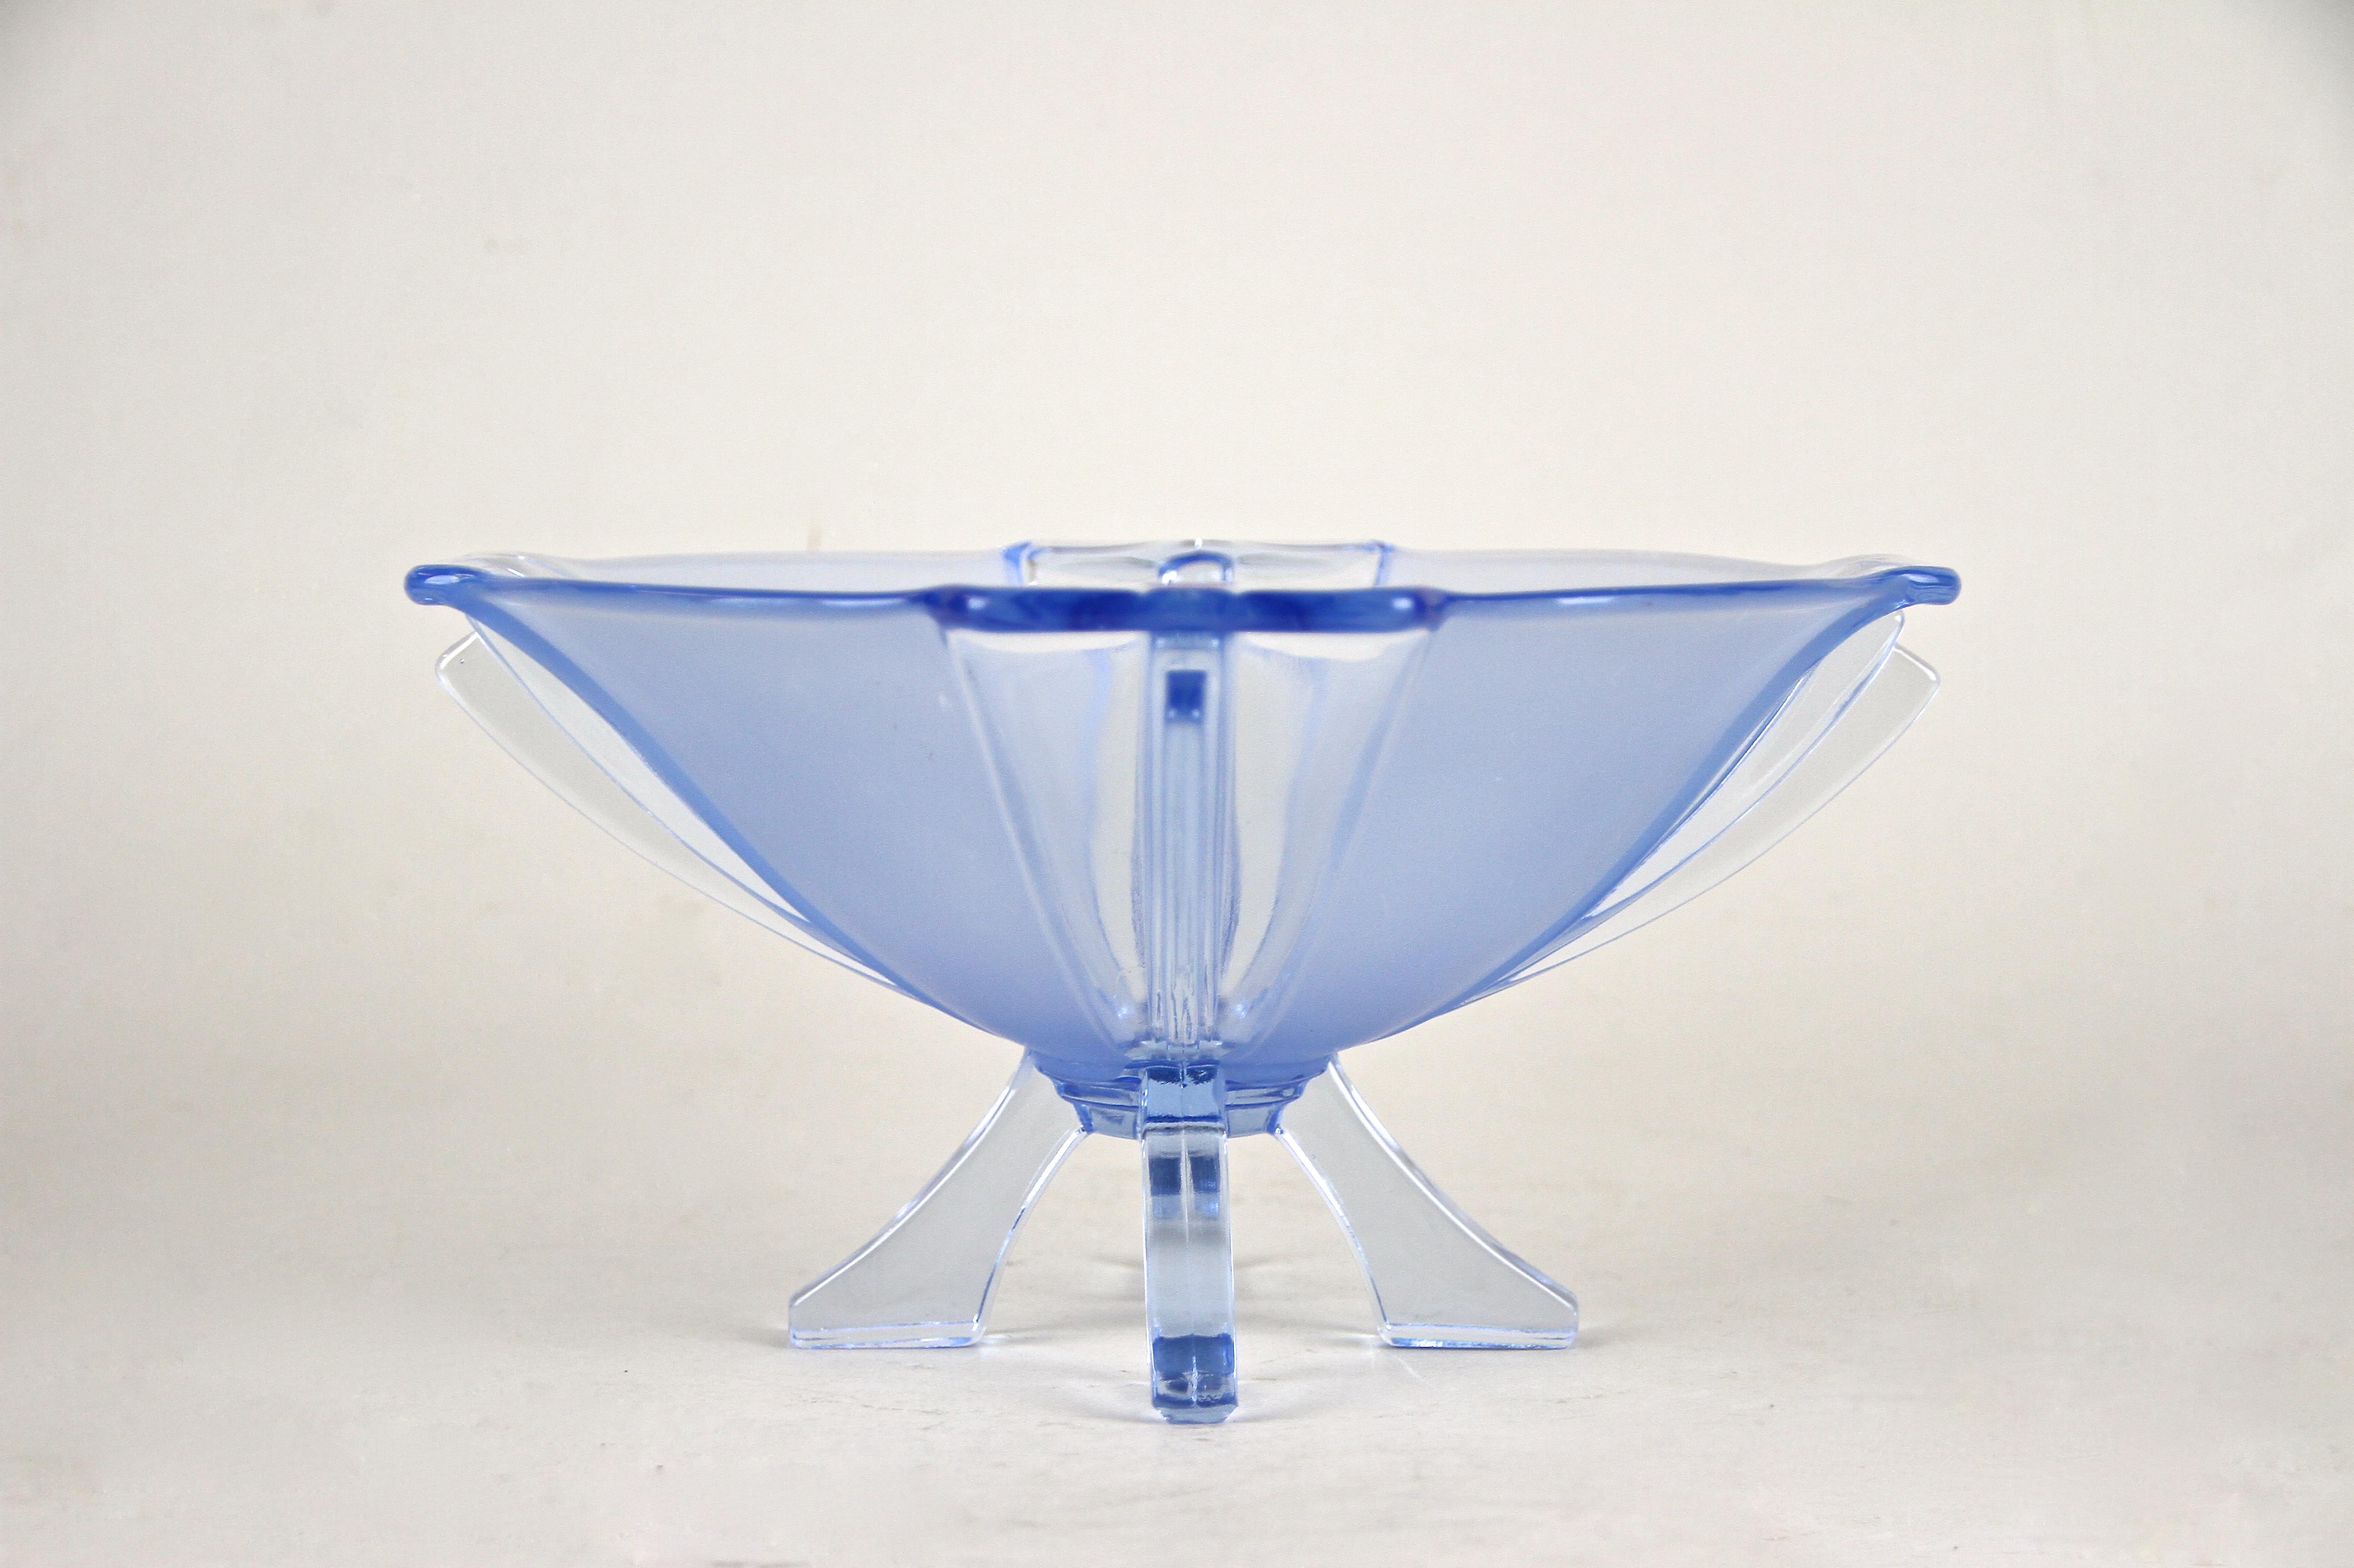 Highly decorative blue Art Deco glass bowl from the early 20th century in Austria. This lovely glass bowl from around 1920 shows an unique design, reflecting the famous Art Deco form language. The elaborate worked glass bowl with satined fields